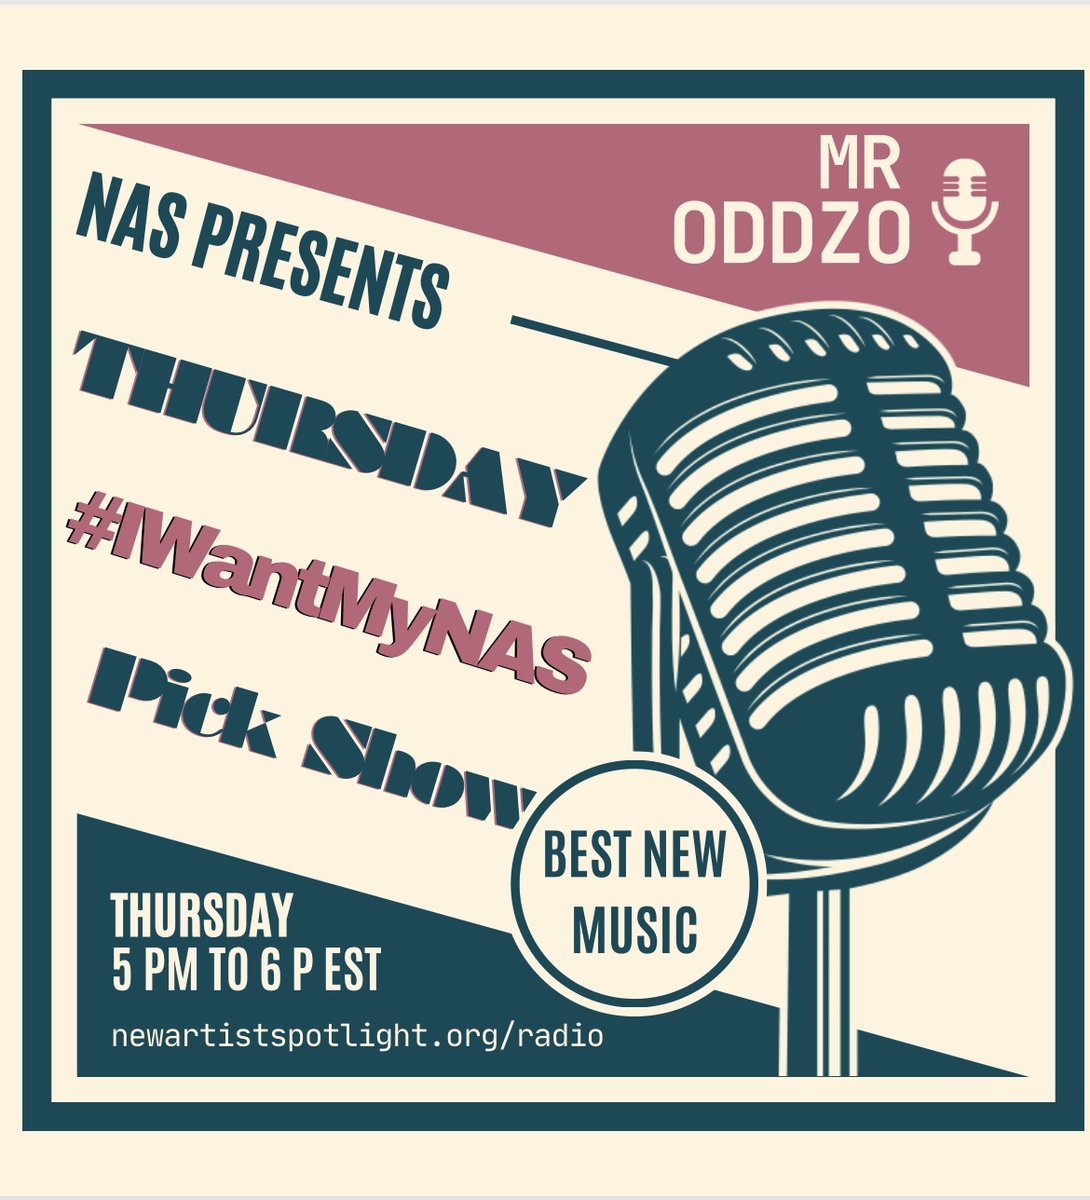 It's a busy premiere day on @MrOddzo's Thurs Pick Show! 🎯 4 @NAS_Spotlight premieres today!! Also ft @BlondeSynthetik @magnusson_macke @DanielTidwell14 @Whalejumpmusic @dom_piper @MalFantome Today at 2PM PT | 5PM ET | 9PM GMT only on @NASIndieRadio newartistspotlight.org/radio